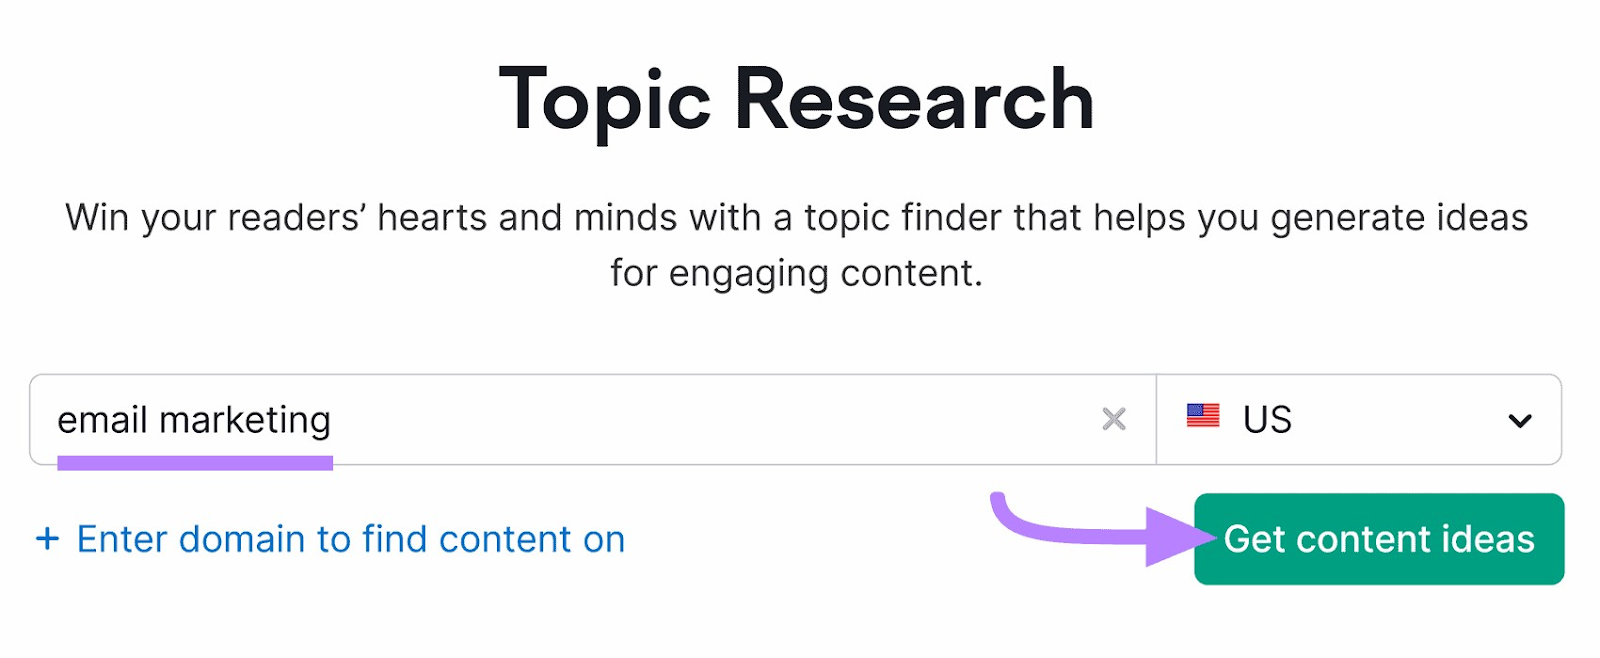 "email marketing" entered into Topic Research tool search bar